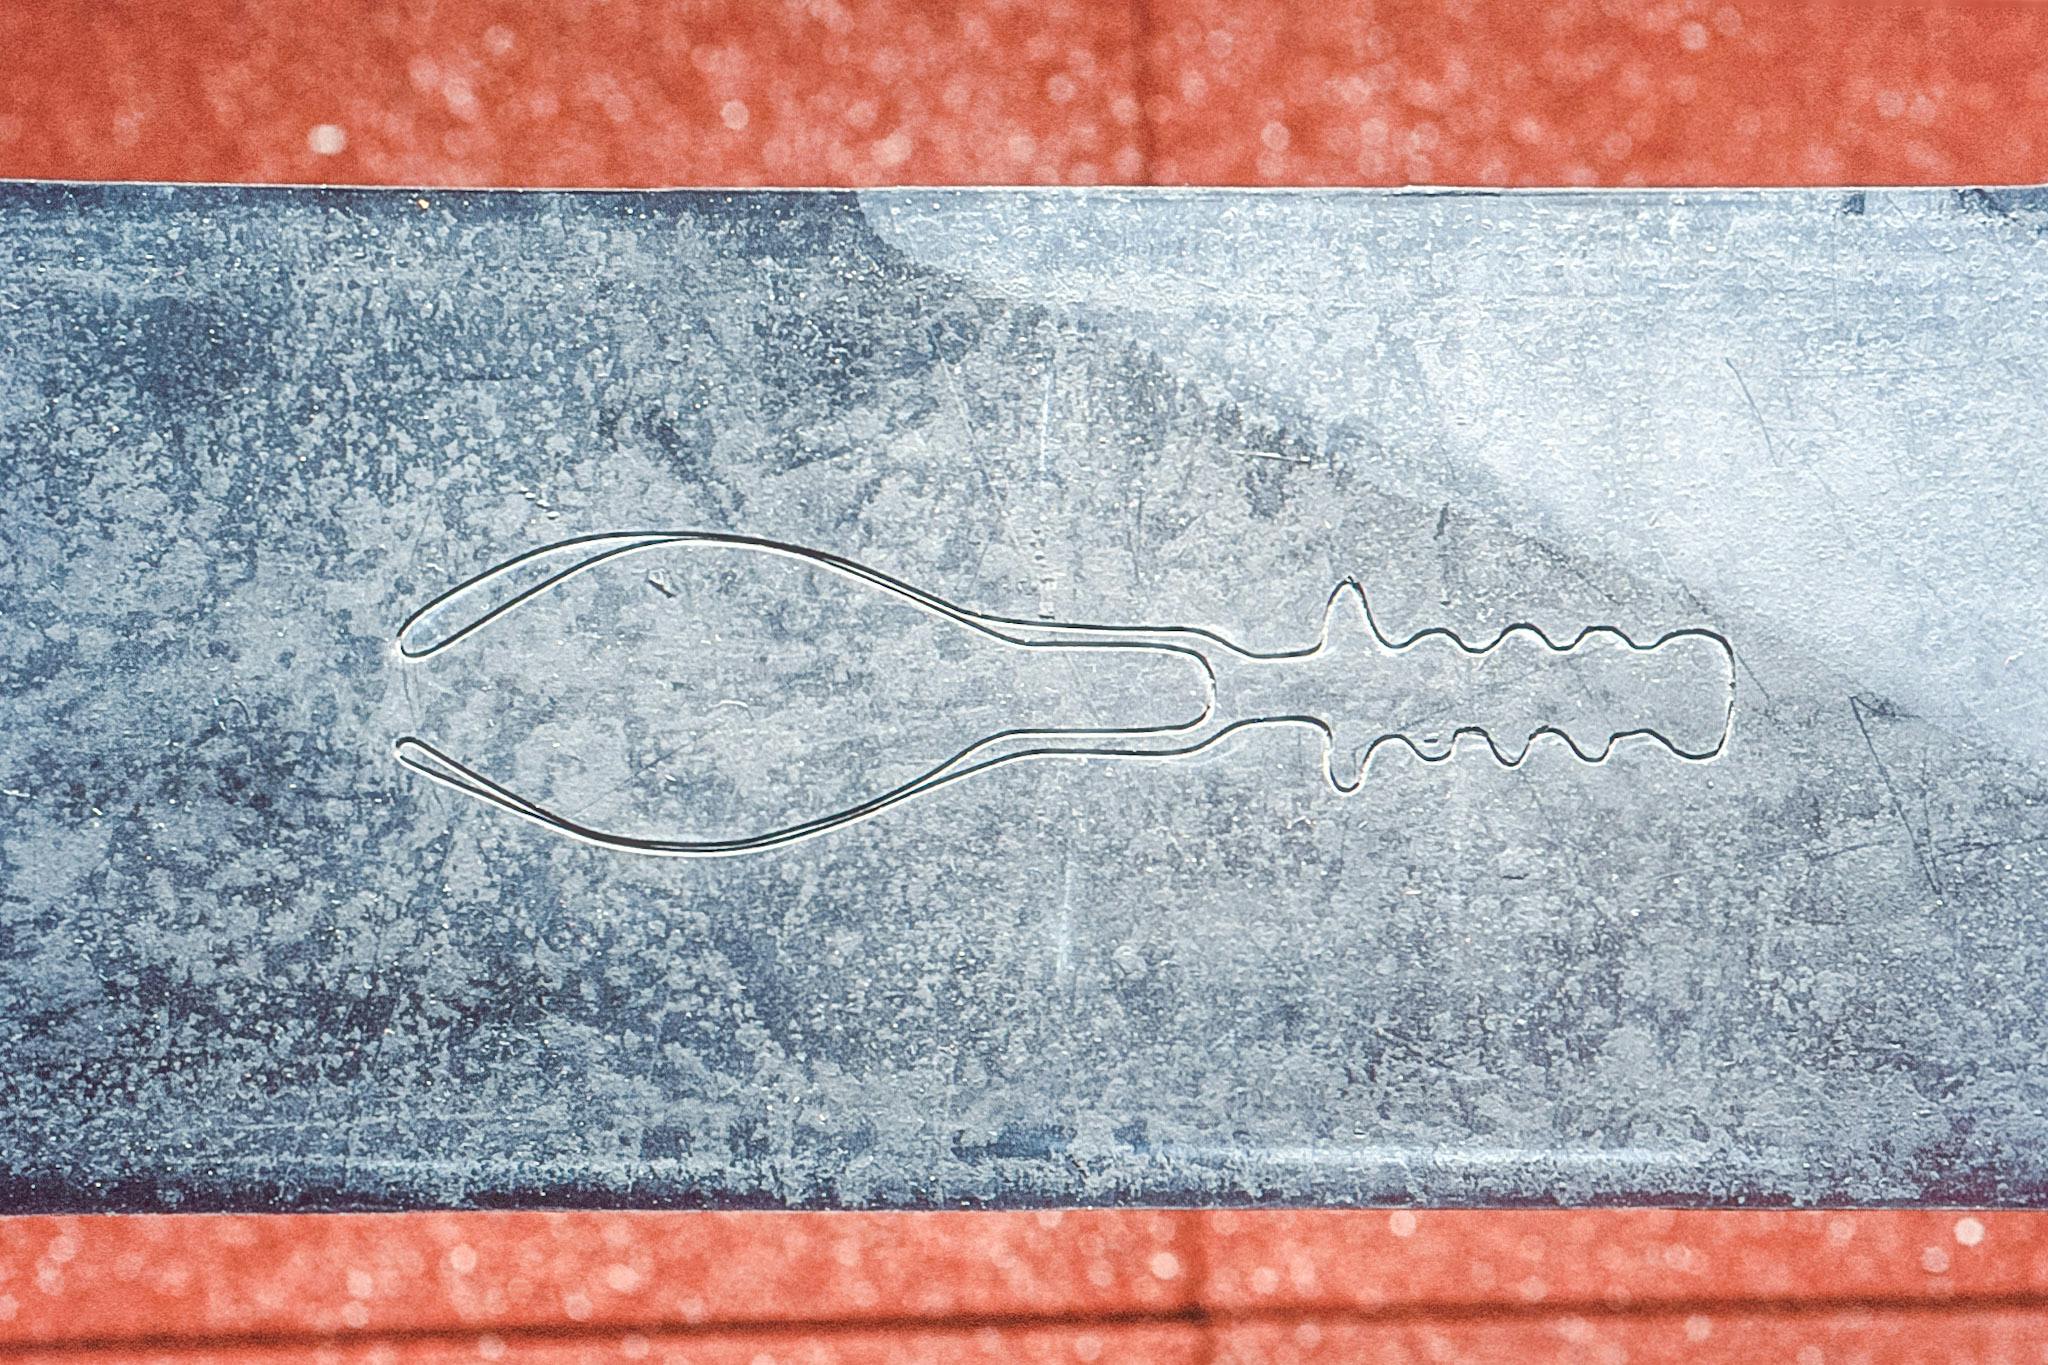 An incomplete shape of a children’s hand shovel is carved on the metal surface. The handle is fully visible, but the blade is half recognizable as if it is stuck in the sand.